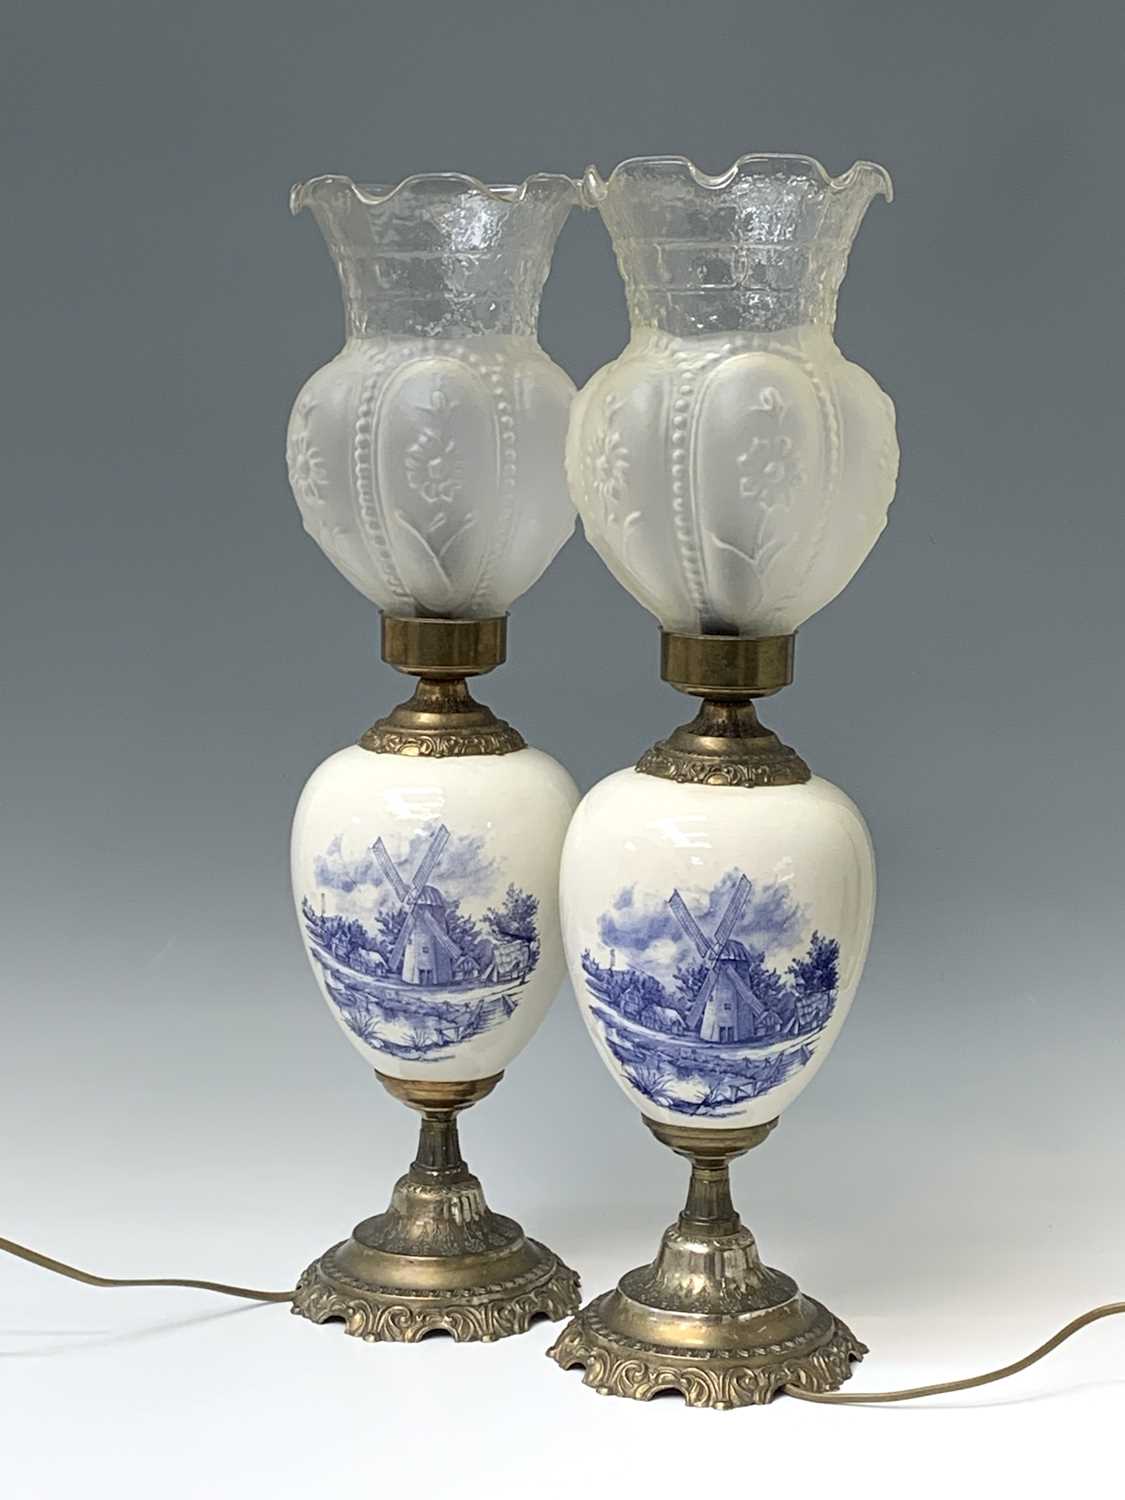 A pair of 20th century gilt metal mounted Delft table lamps with glass shades. Height 60.5cm. - Image 2 of 11